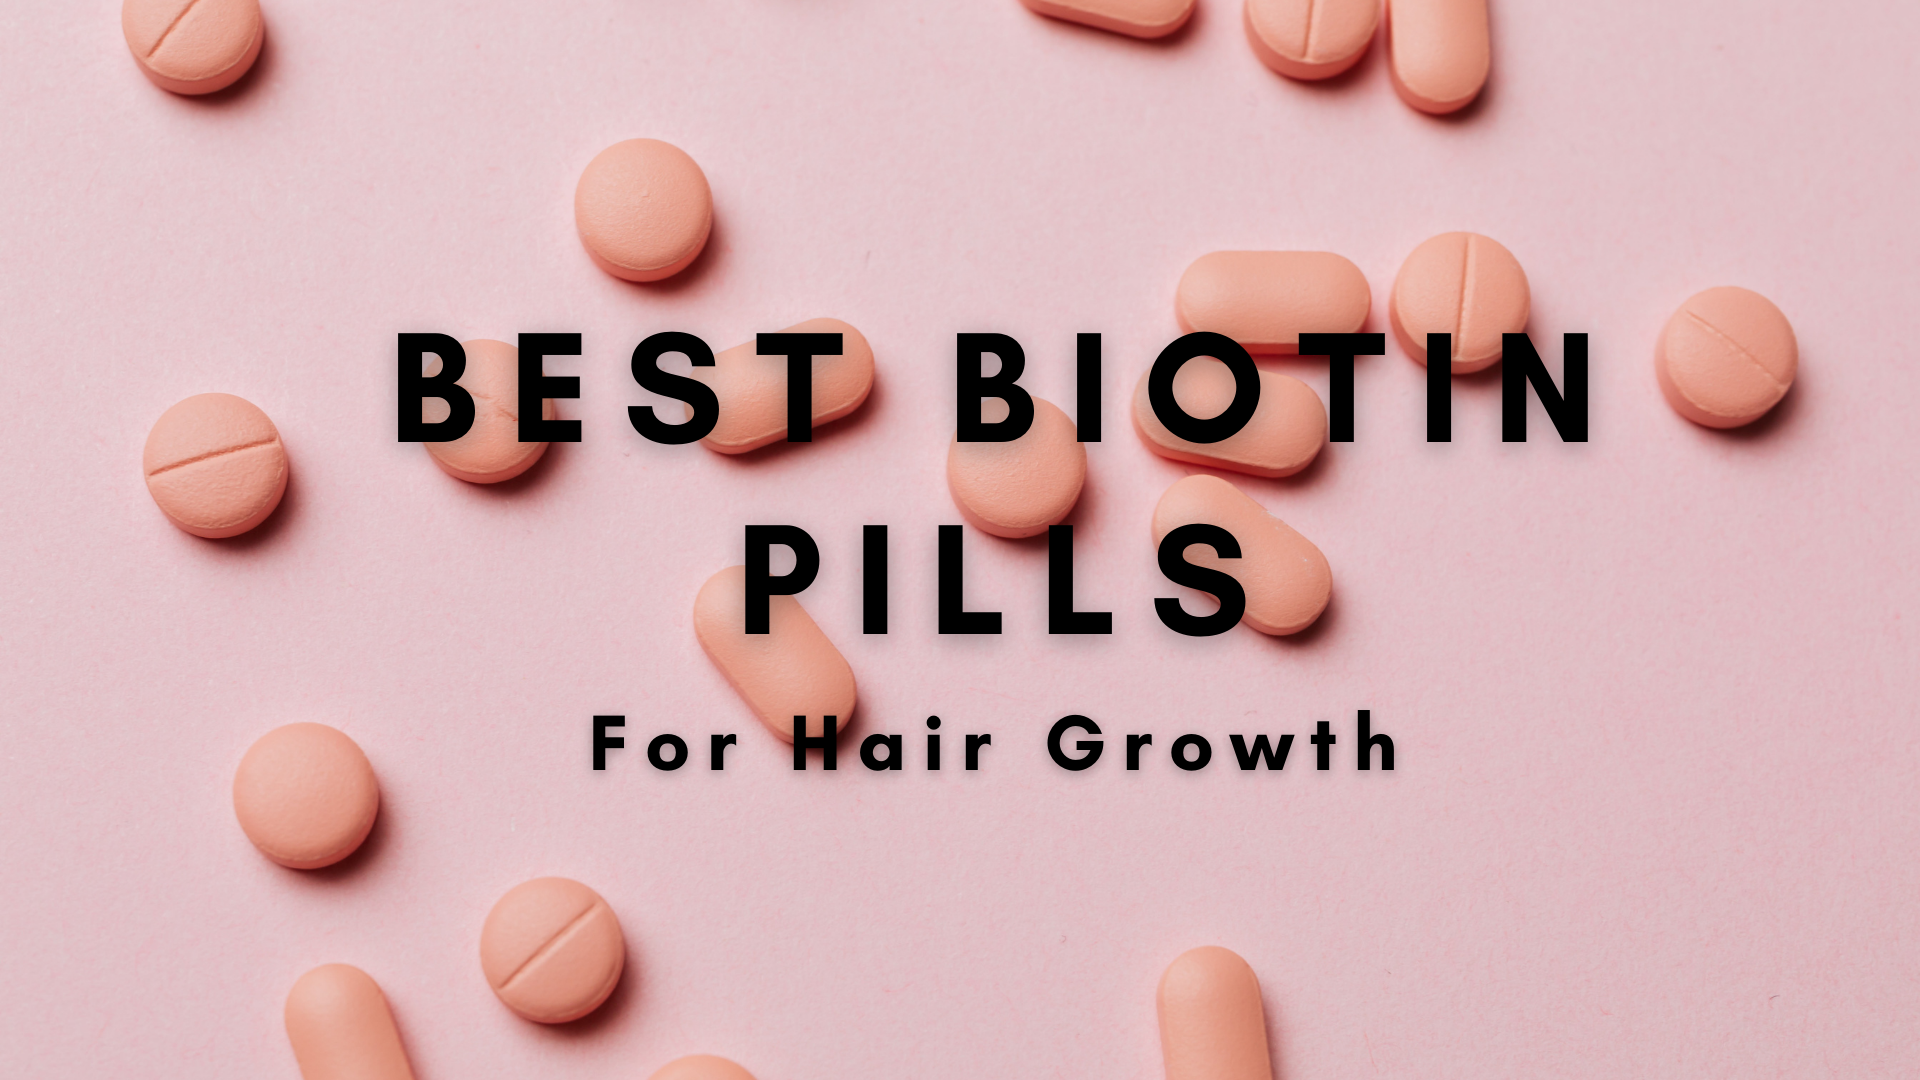 10 Best Biotin Tablets For Hair Growth - Biotin And Its Benefits